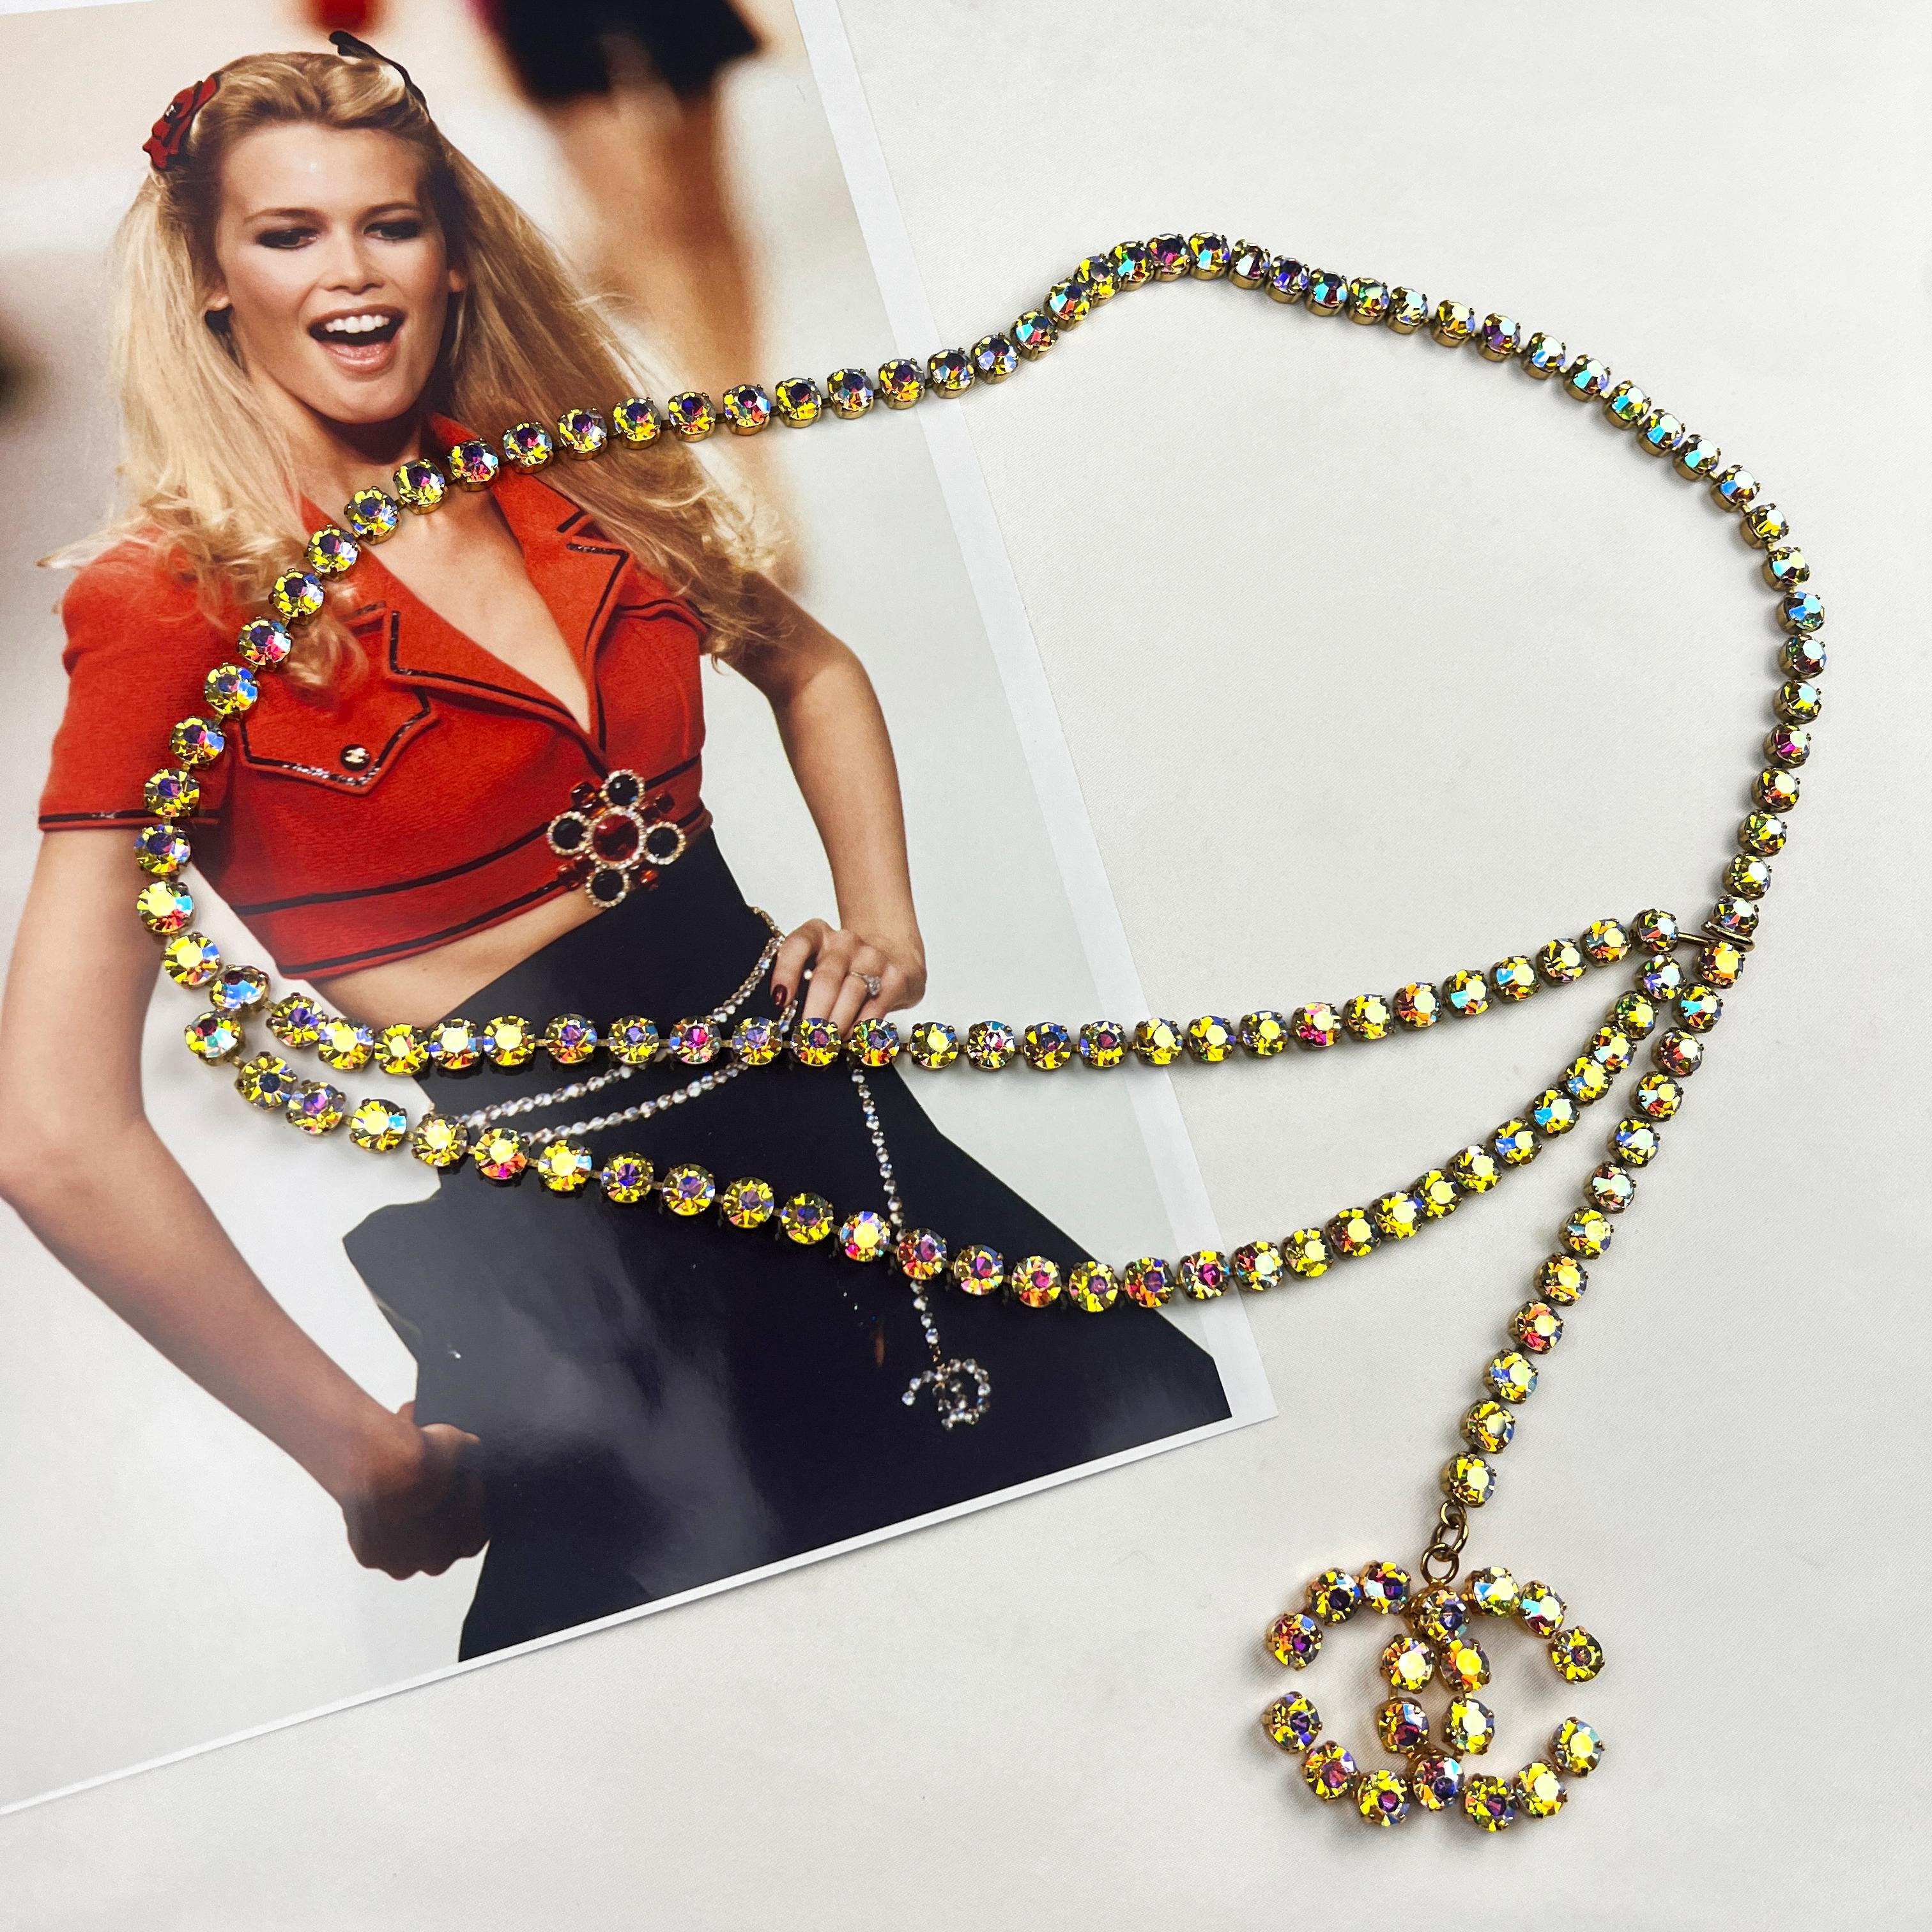 Iconic Chanel rainbow crystal belt, with CC logo pendant. From the Spring/Summer 1995 collection designed by Karl Lagerfeld, often referred to as the 'Barbie' collection. As seen on the runway and advertising campaign modelled by Claudia Schiffer.